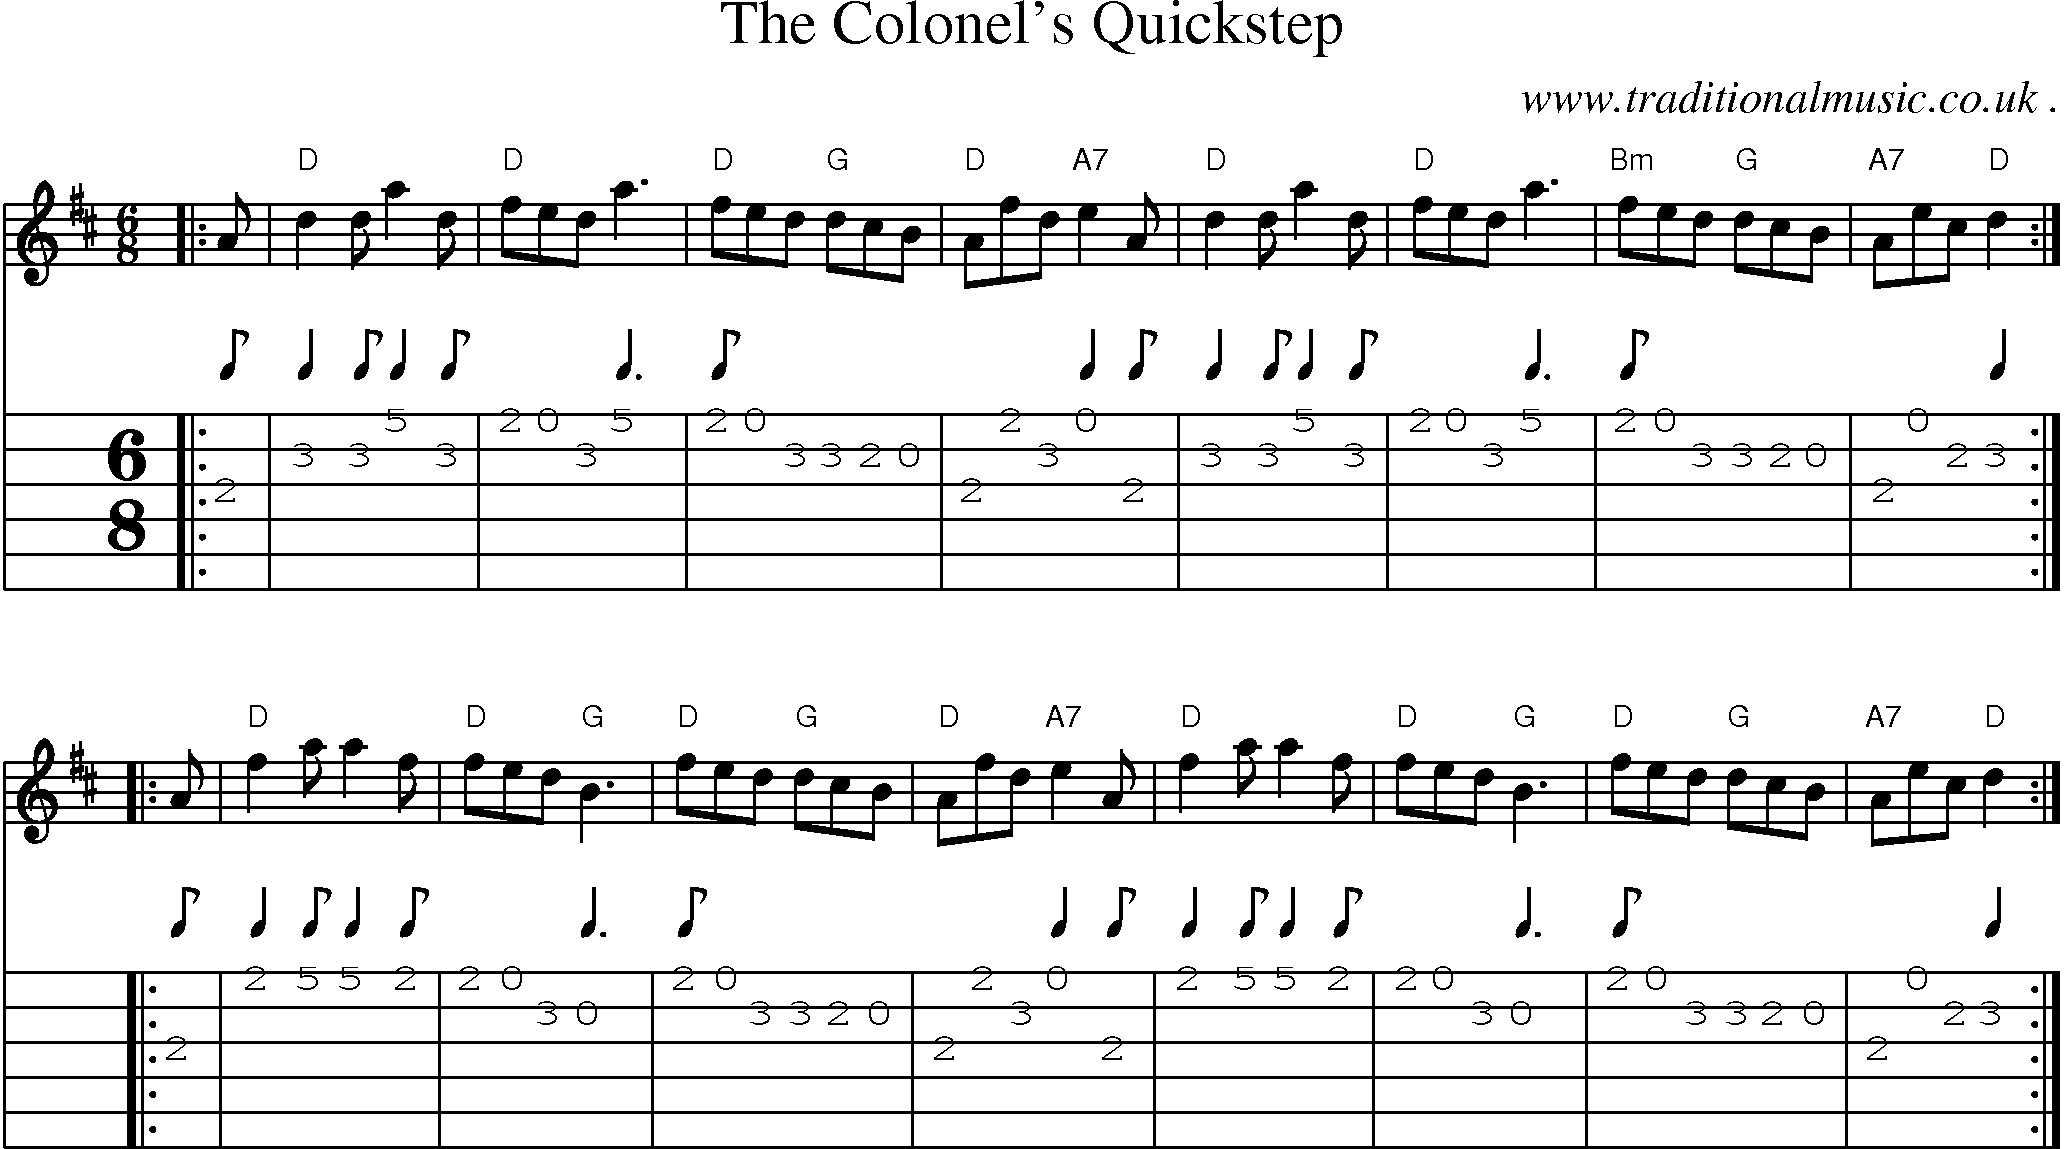 Sheet-music  score, Chords and Guitar Tabs for The Colonels Quickstep